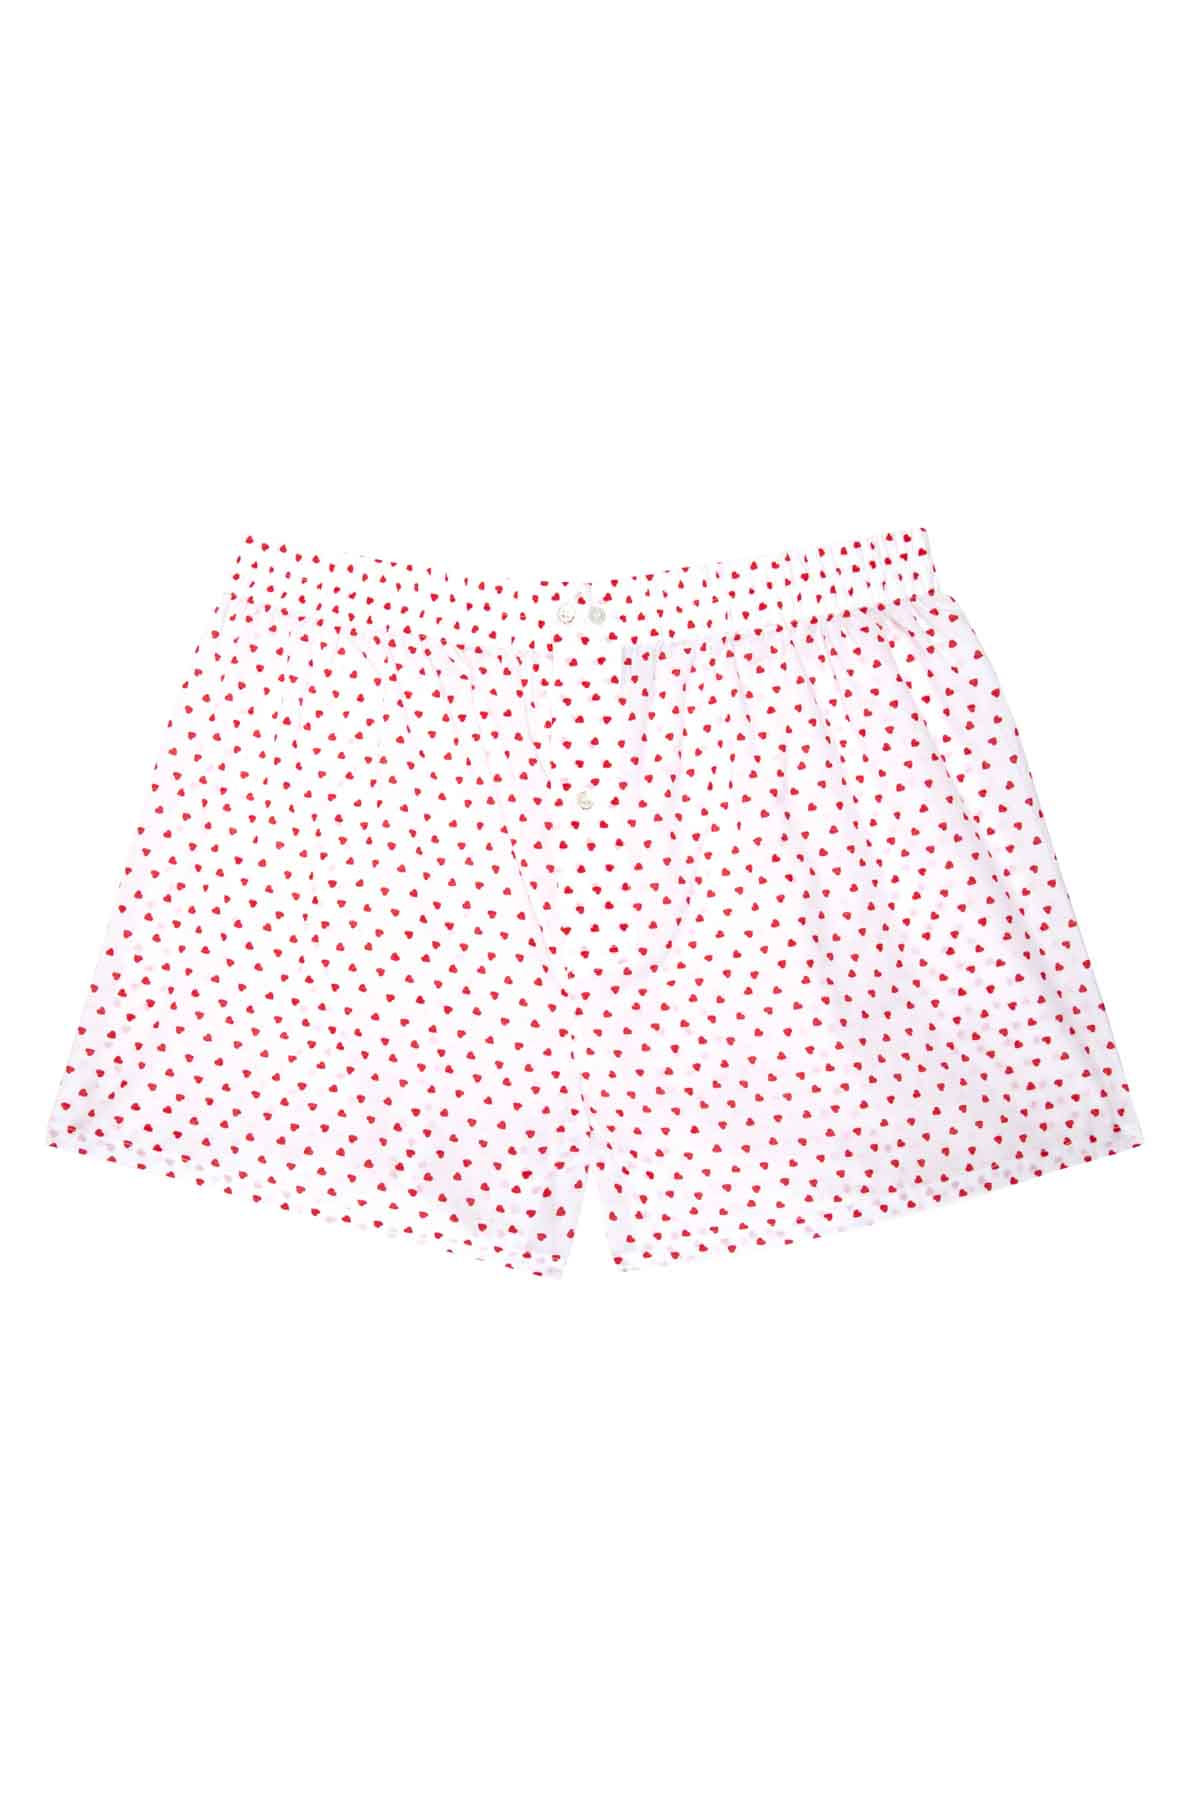 Men's Boxers - Small Red Hearts